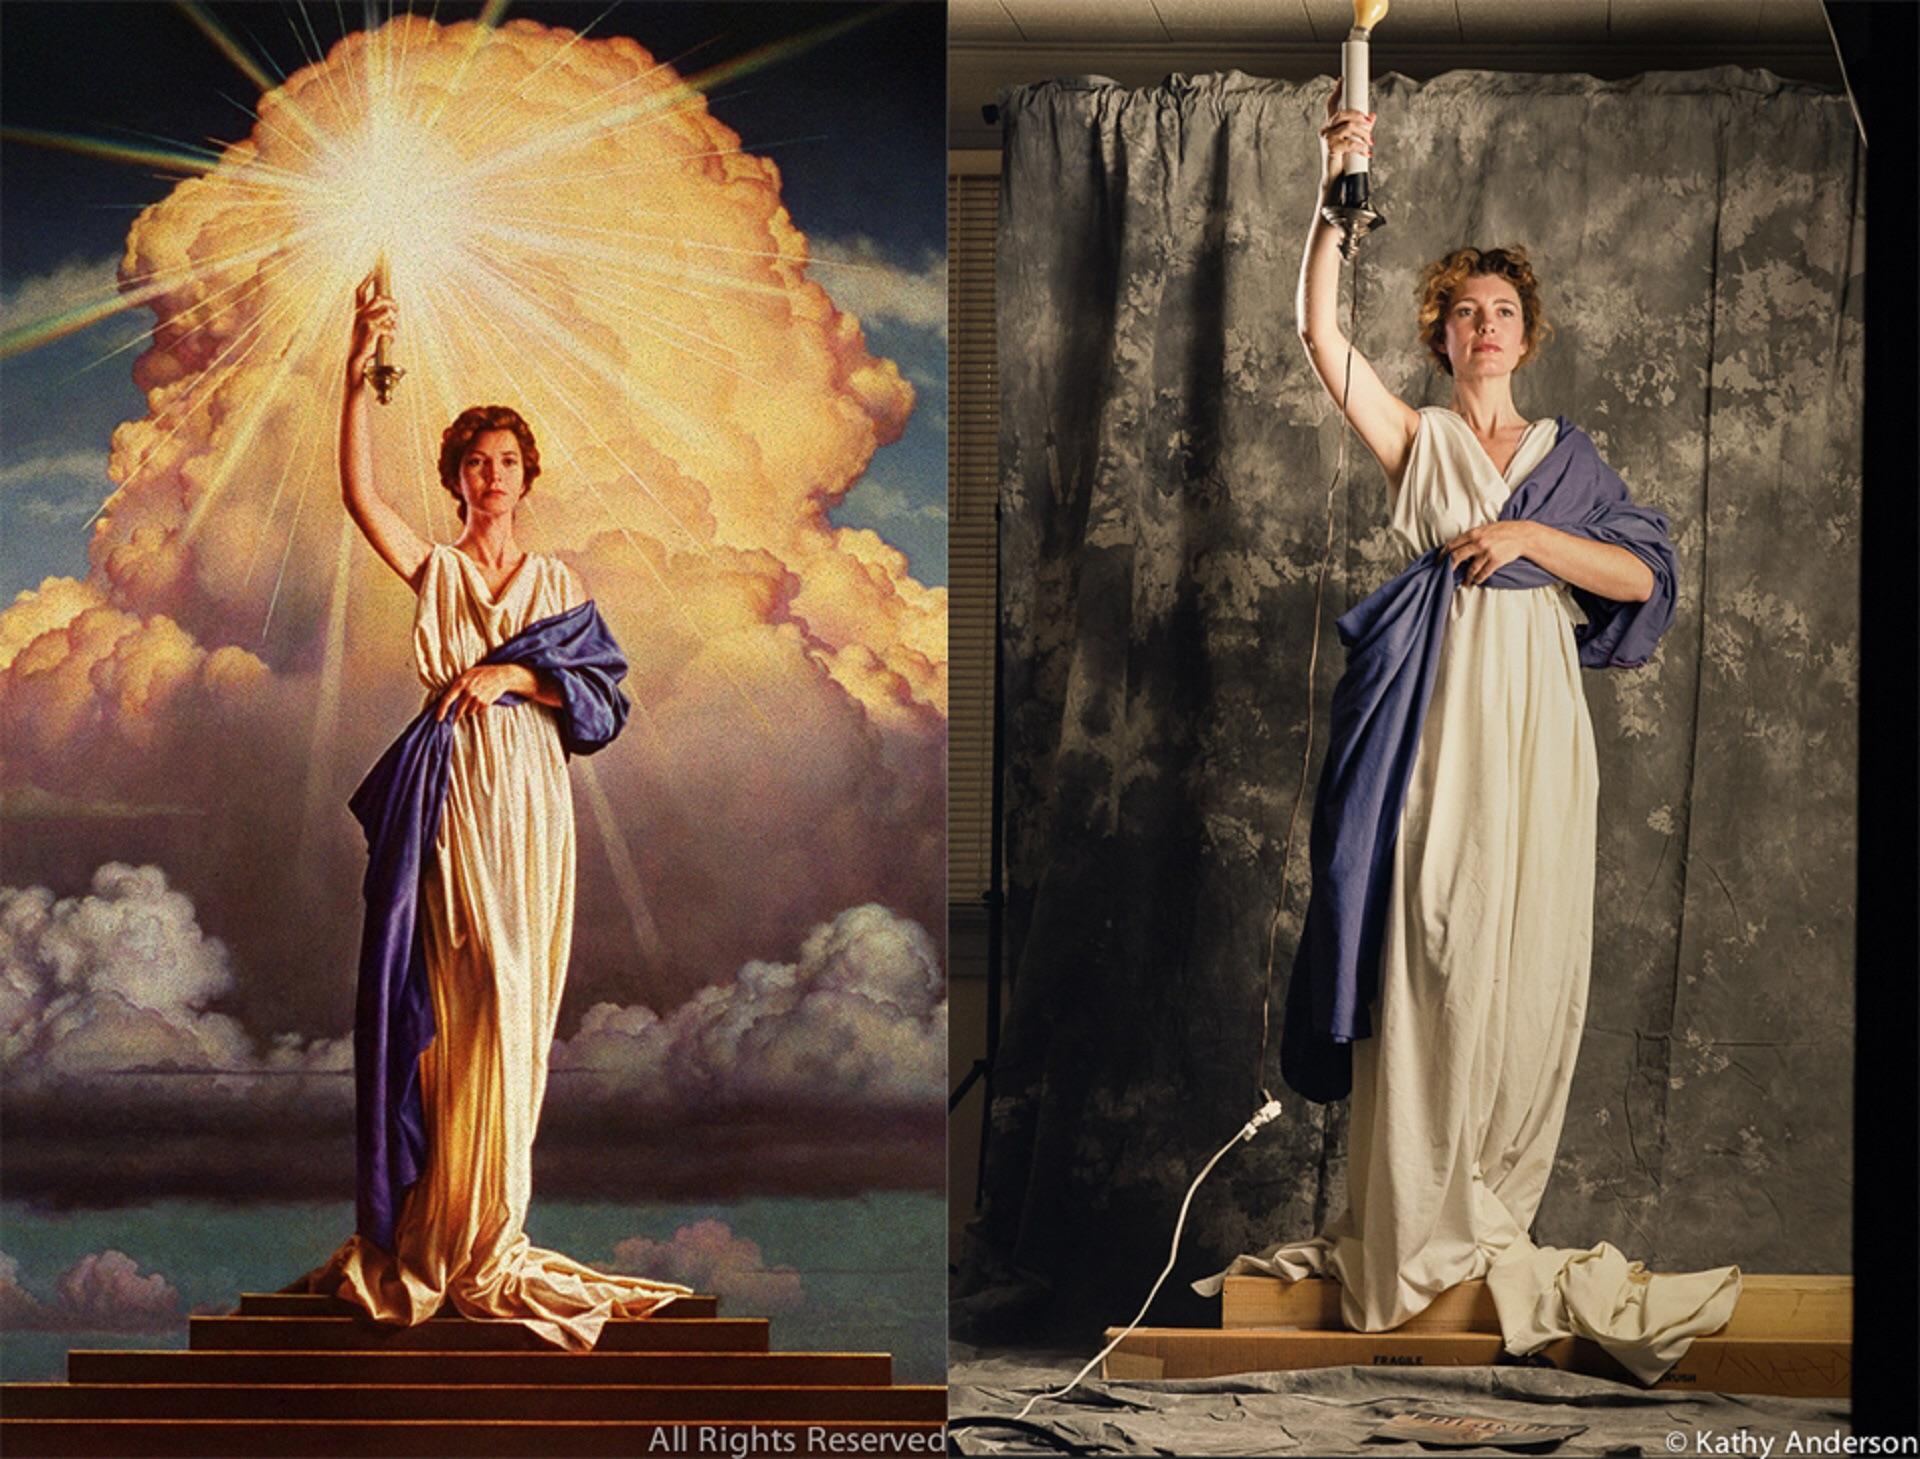 28-year-old Jenny Joseph posing for Columbia Pictures Logo, 1992.jpg